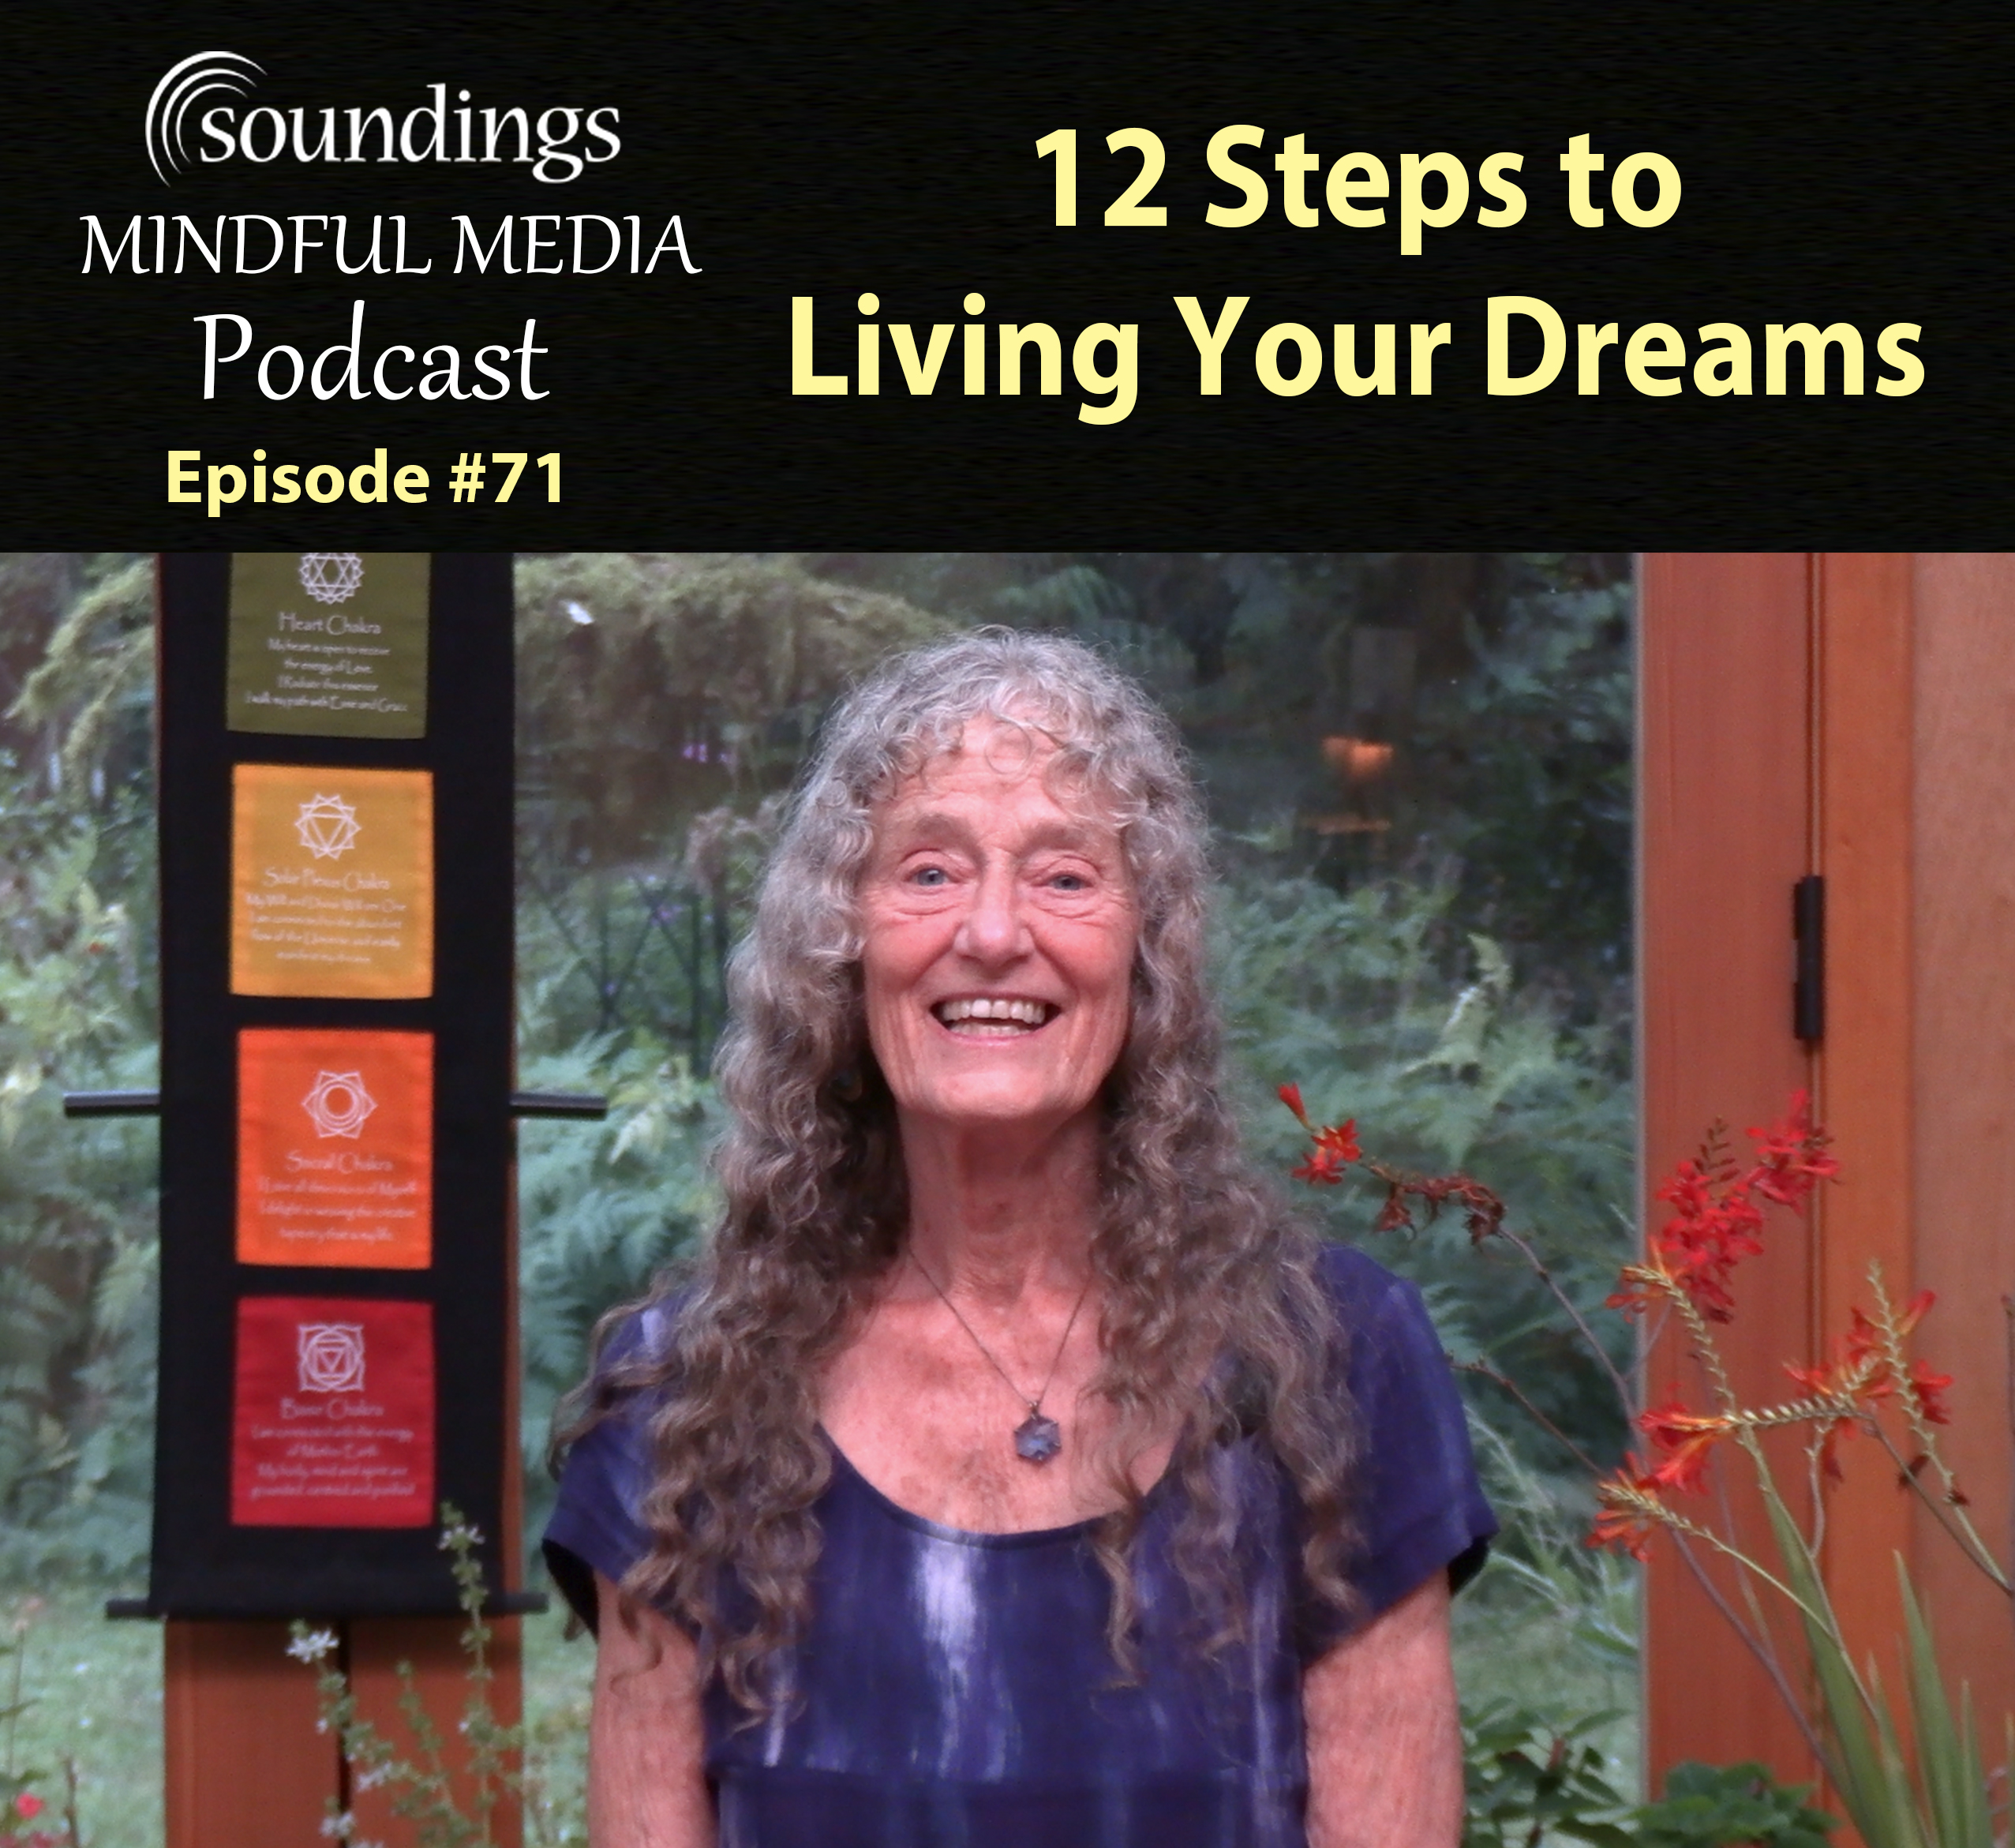 12 Steps to Living Your Dreams